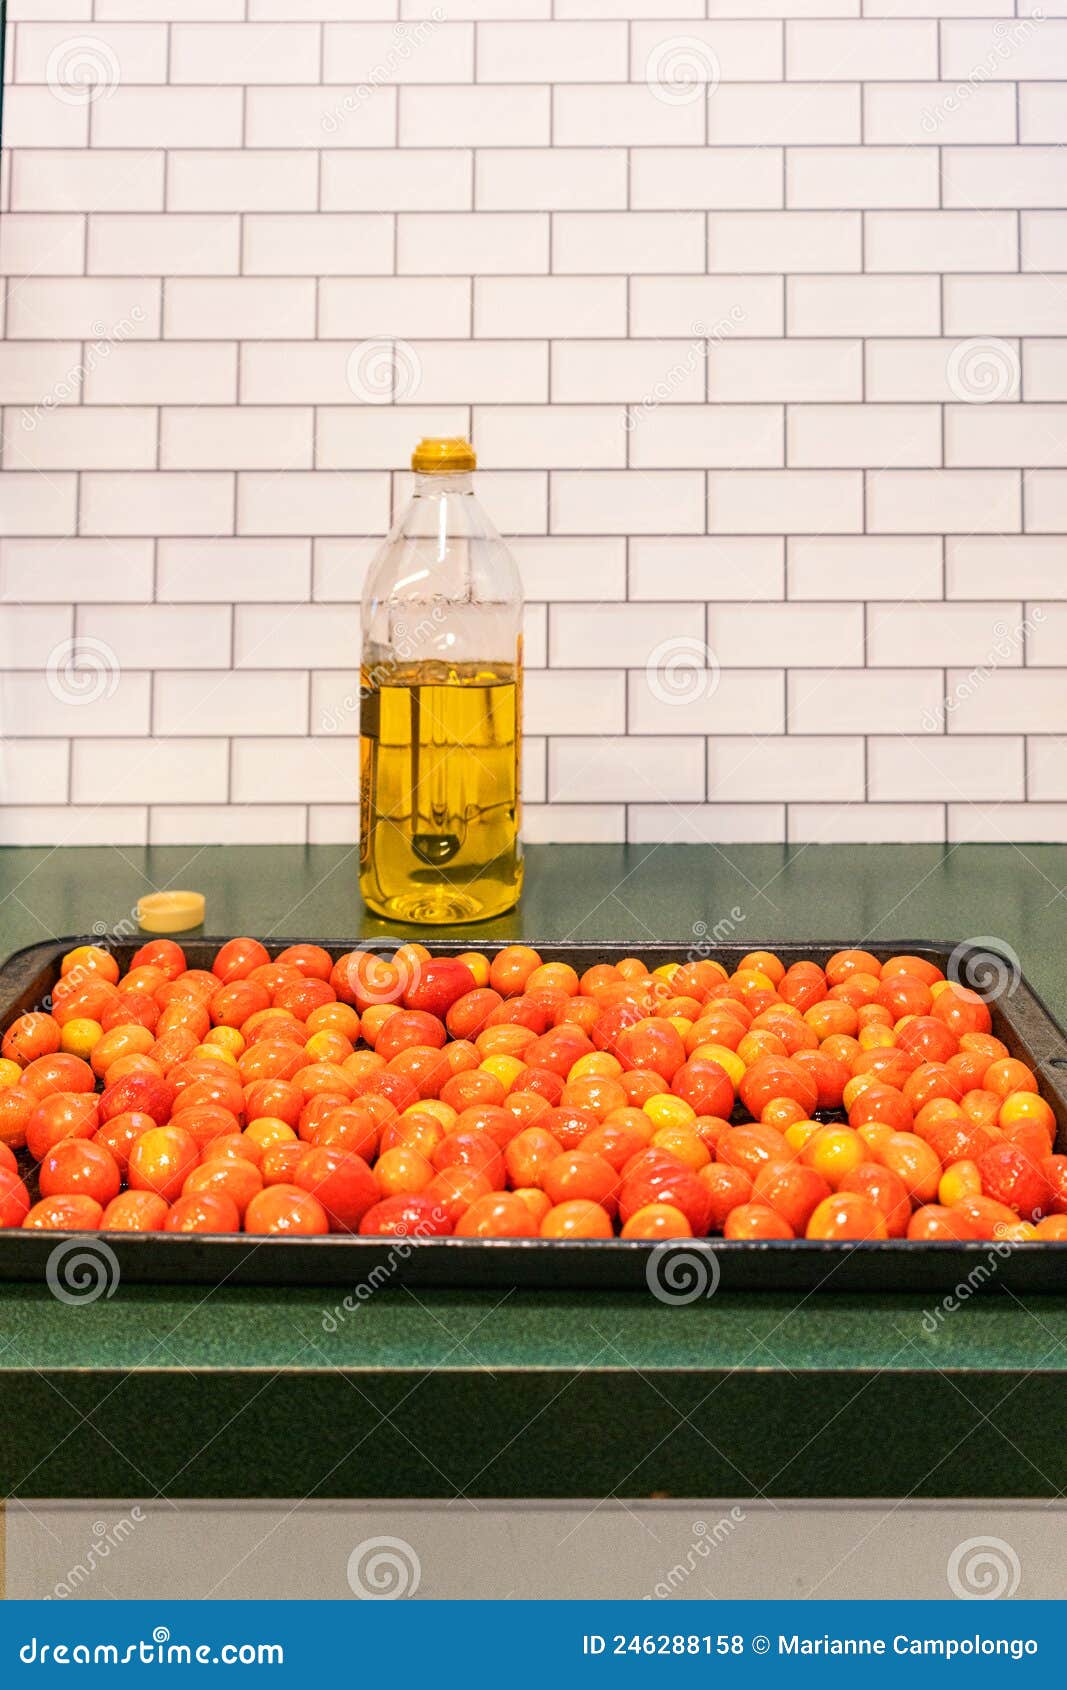 roasting pan with `a grappoli d`inverno` winter grape tomatoes and a bottle of italian olive oil